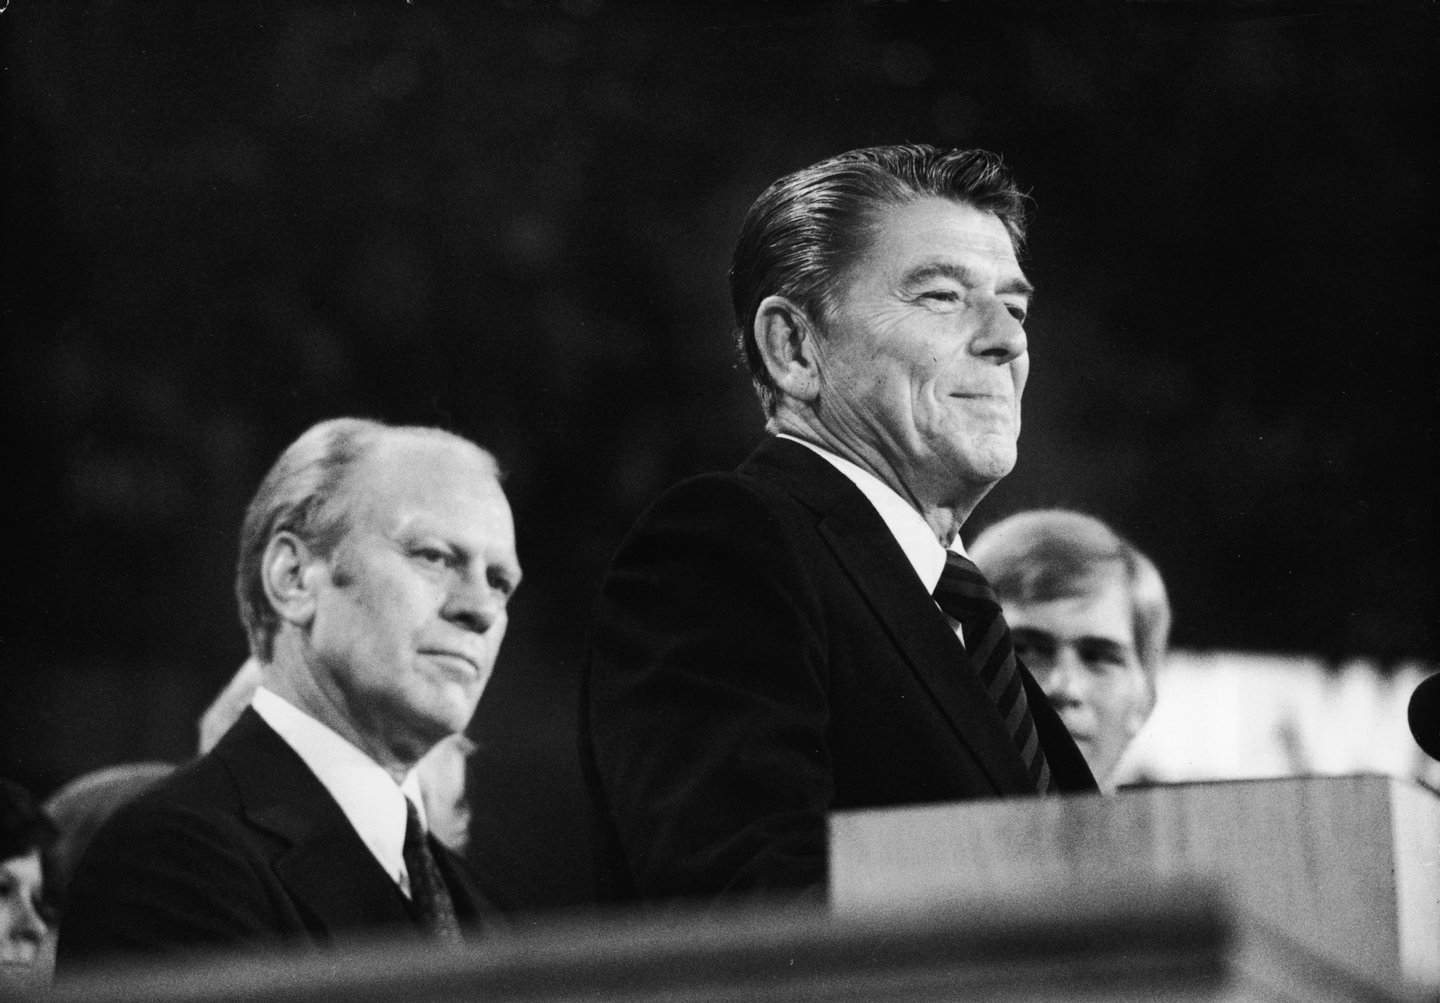 American president Gerald Ford (left) listens as future American president Ronald Reagan (1911 - 2004) delivers a speech during the closing session of the Republican National Convention, Kansas City, Missouri, August 19, 1976. (Photo by Hulton Archive/Getty Images)